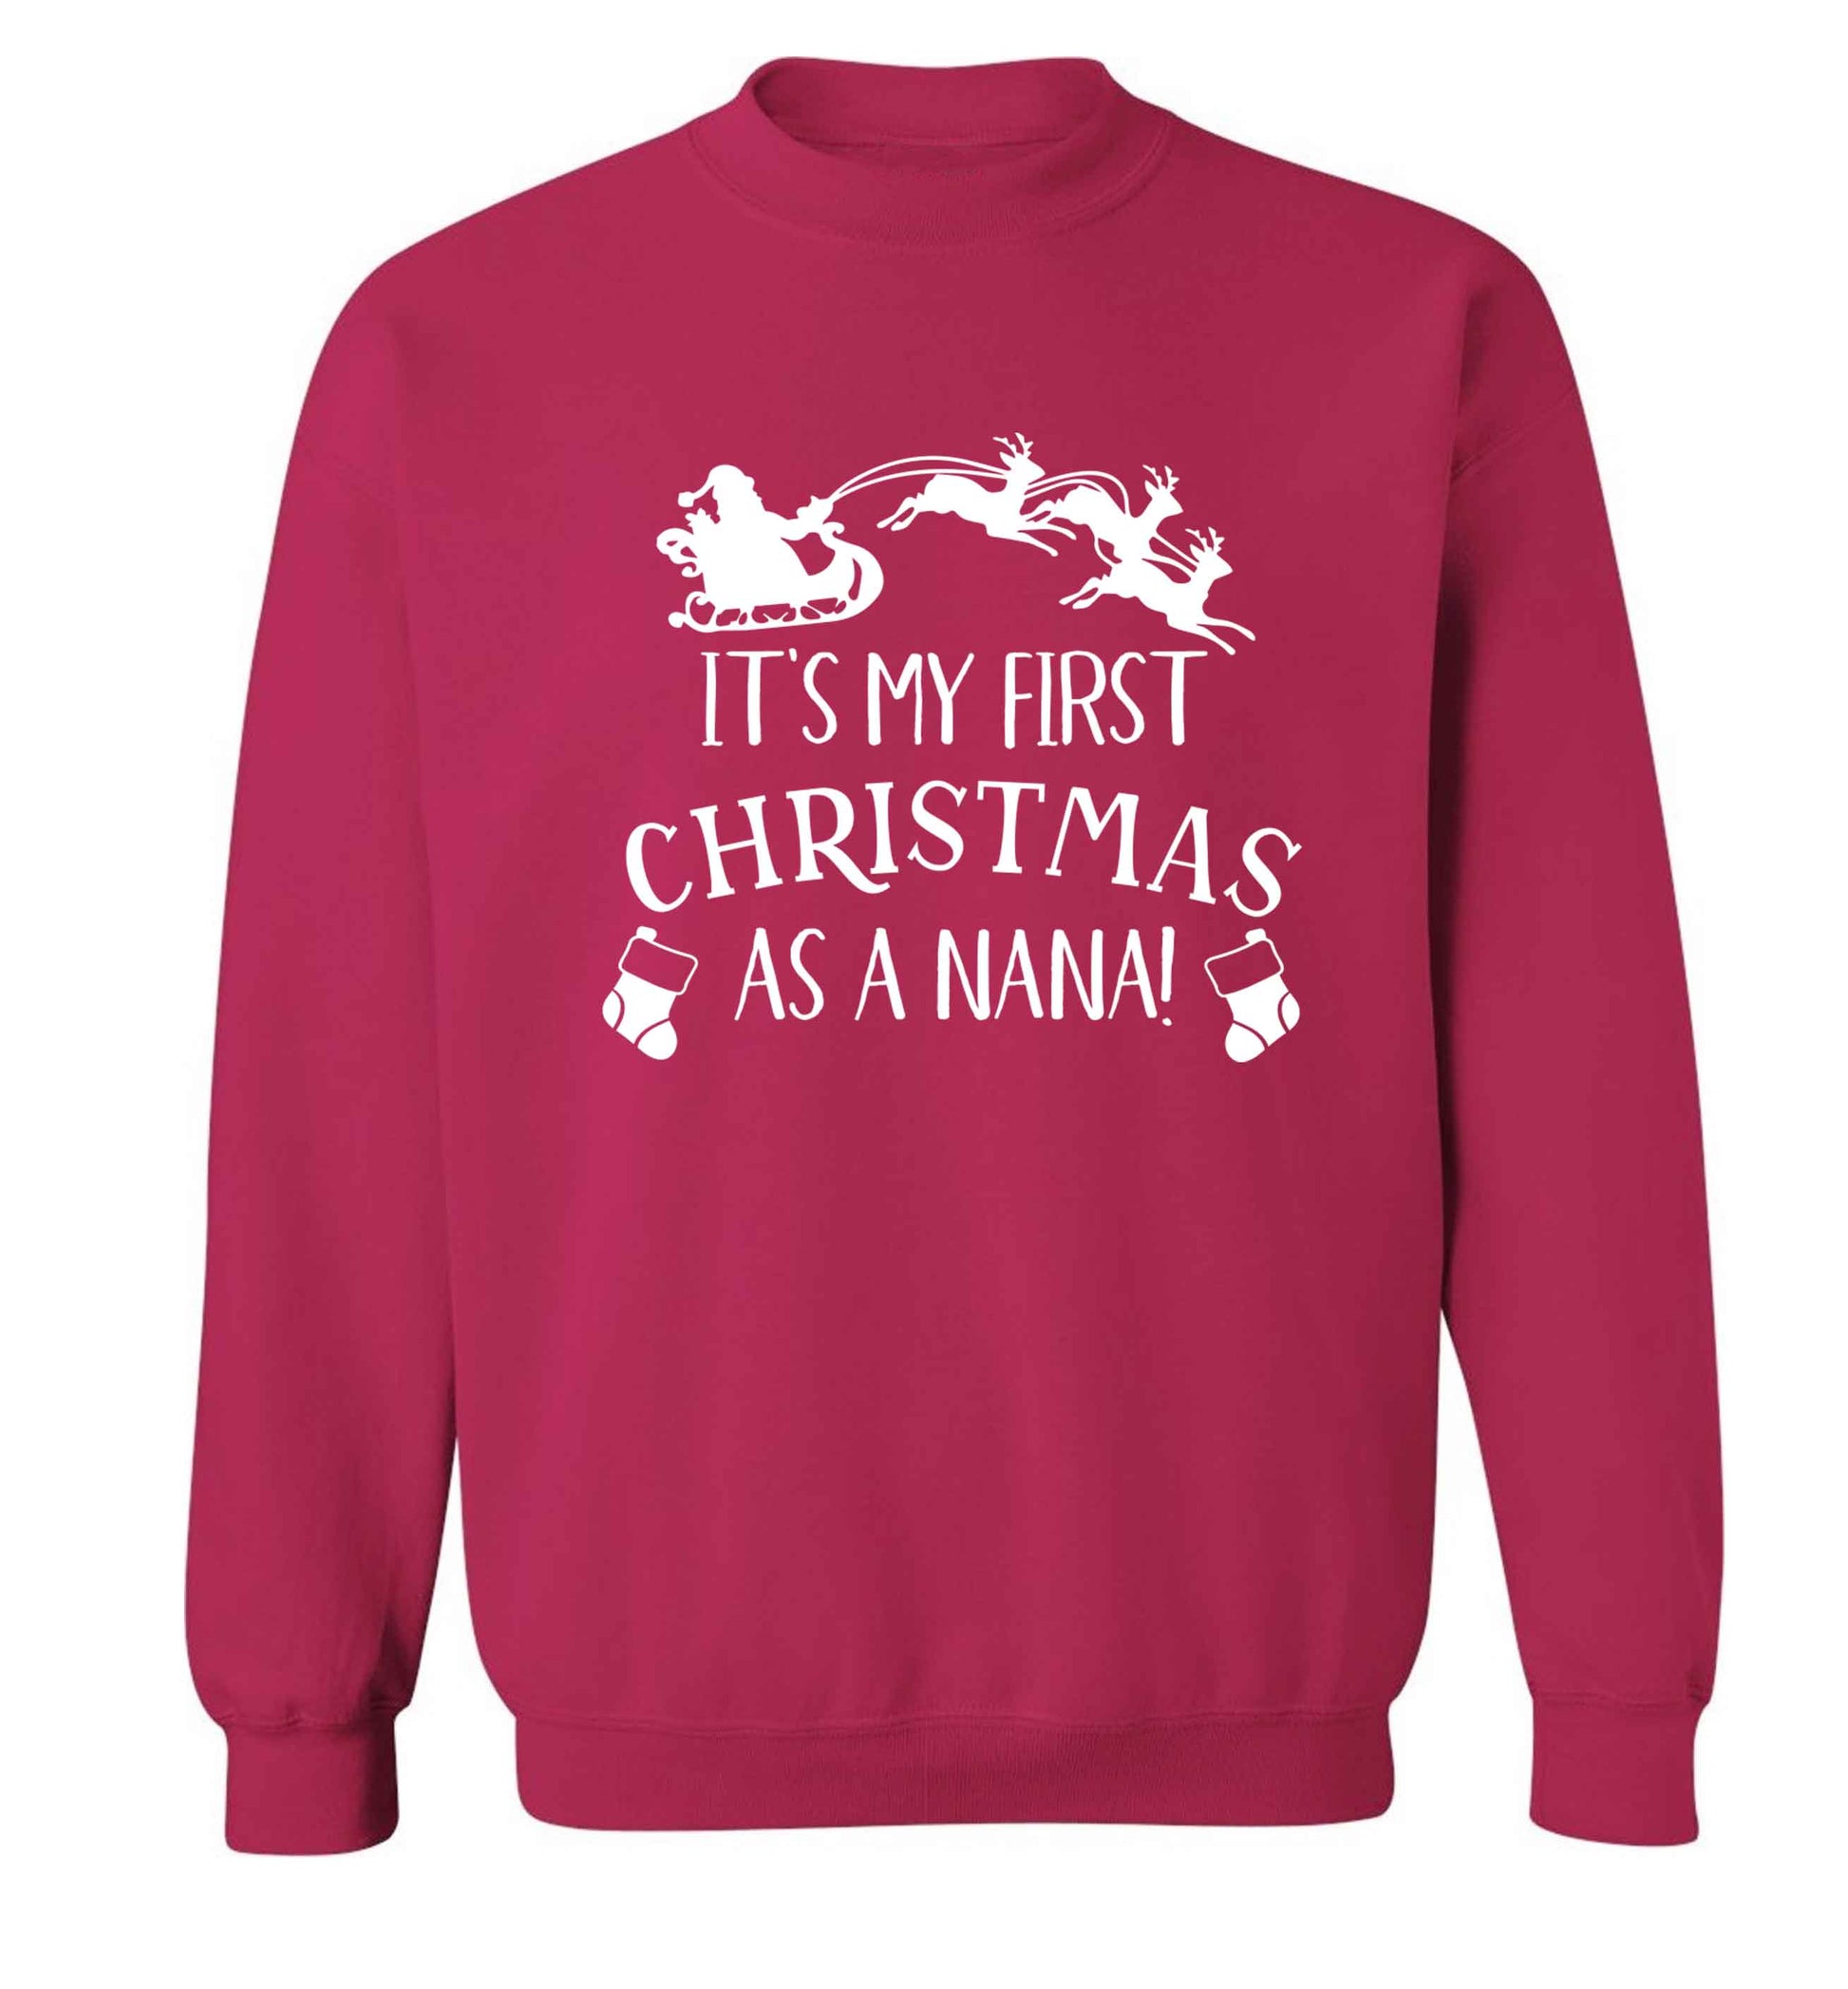 It's my first Christmas as a nana Adult's unisex pink Sweater 2XL